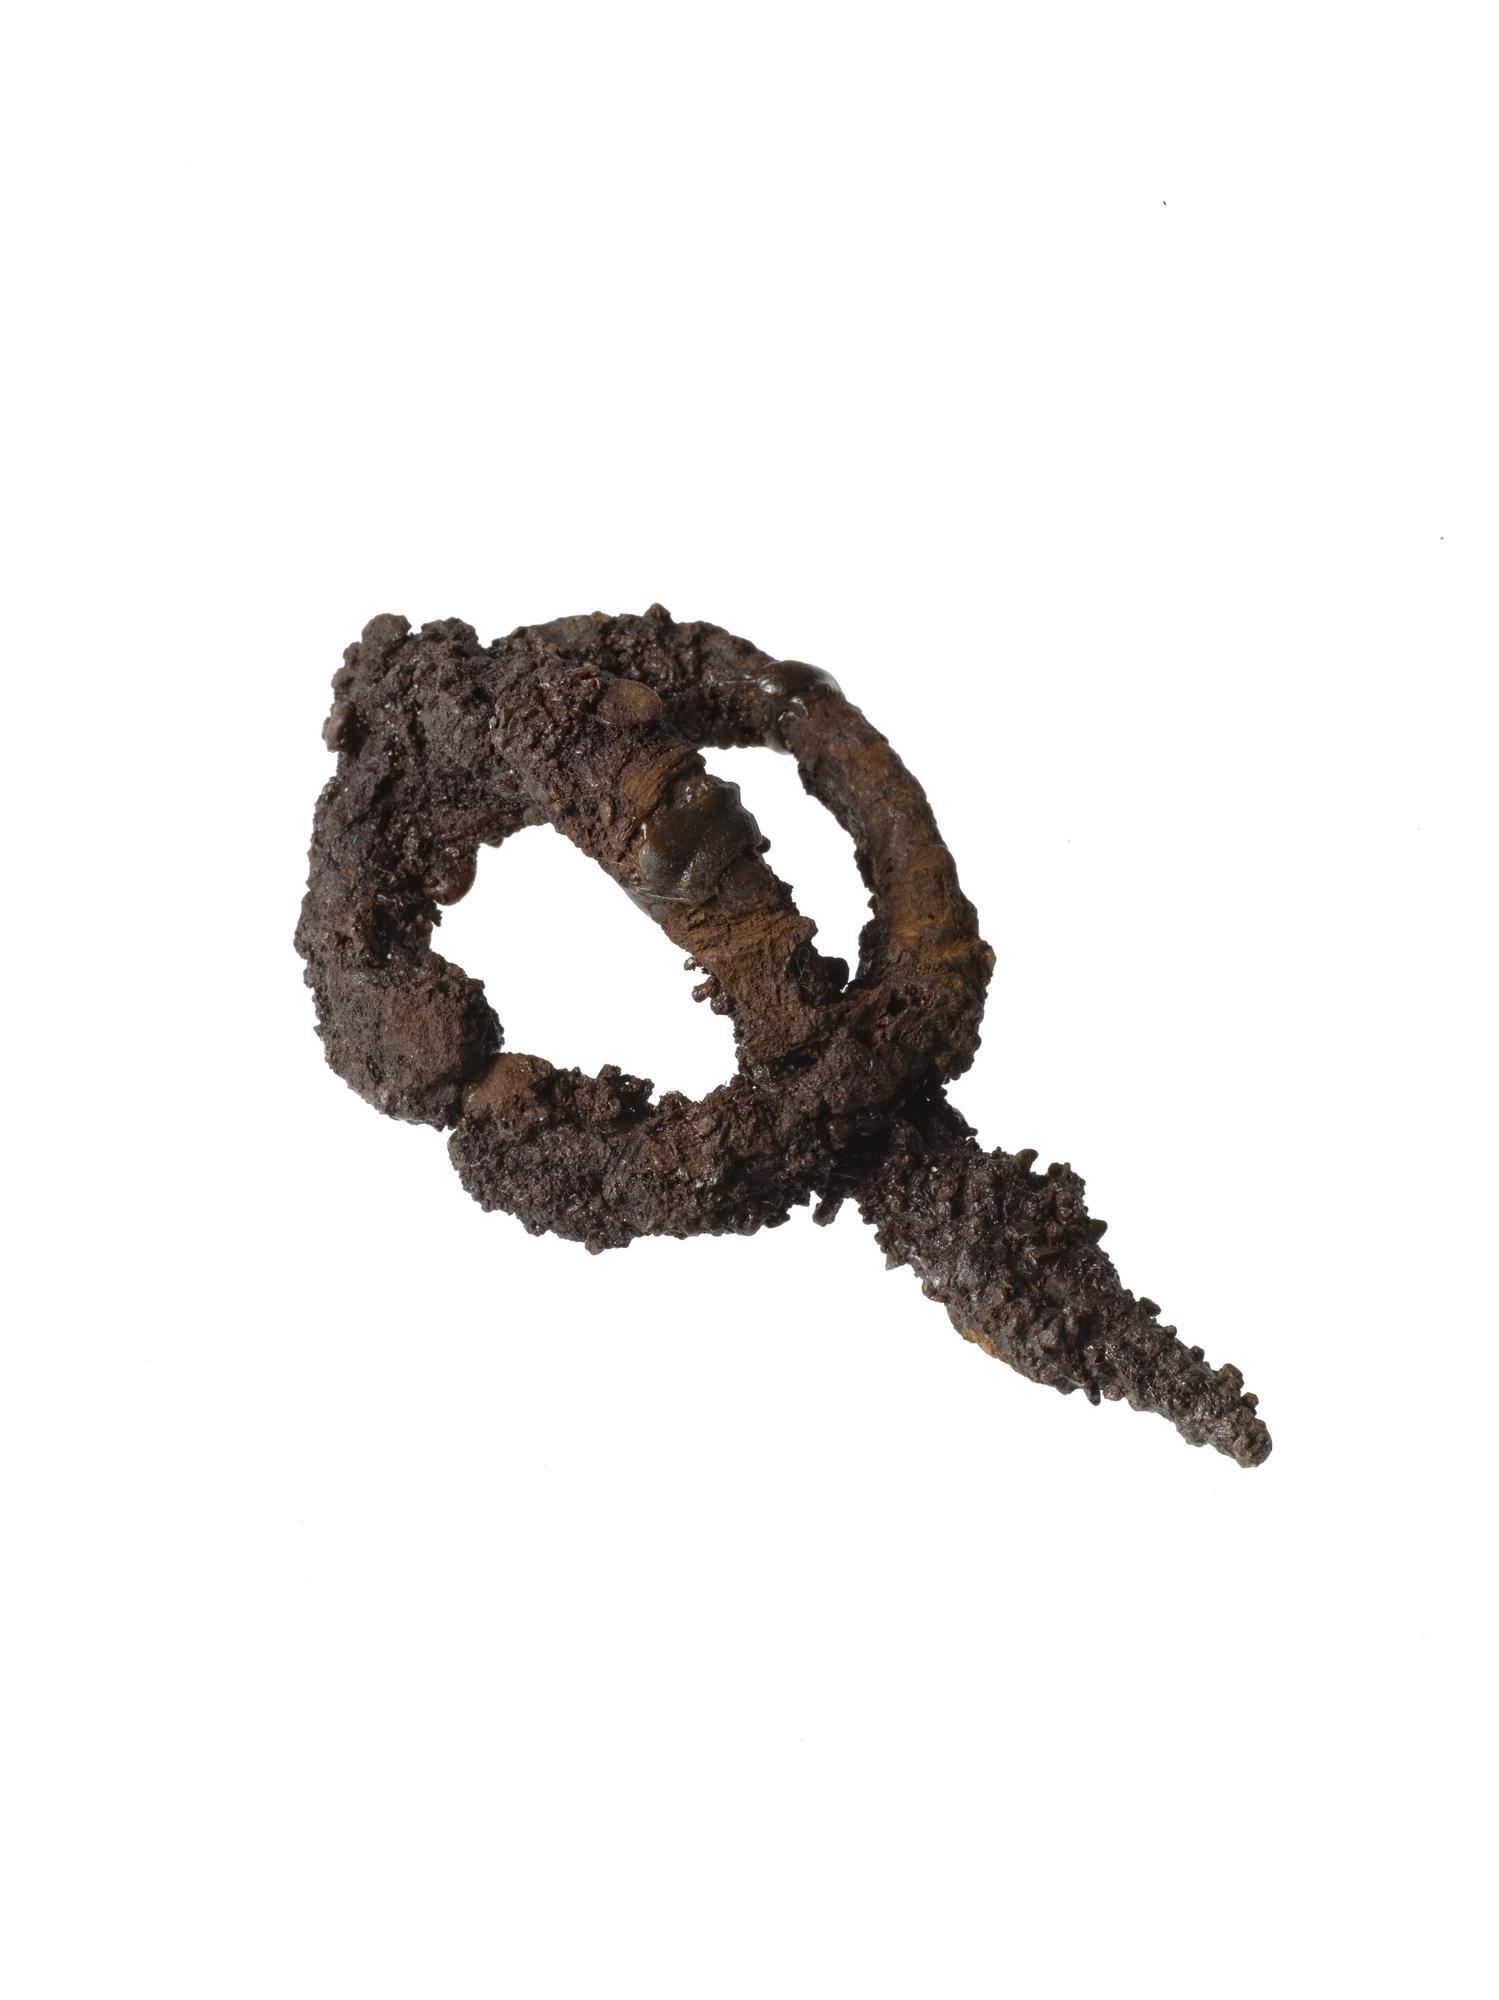 Image of Iron brooch with very faint textile remains, found in a cist at Craigie © National Museums Scotland